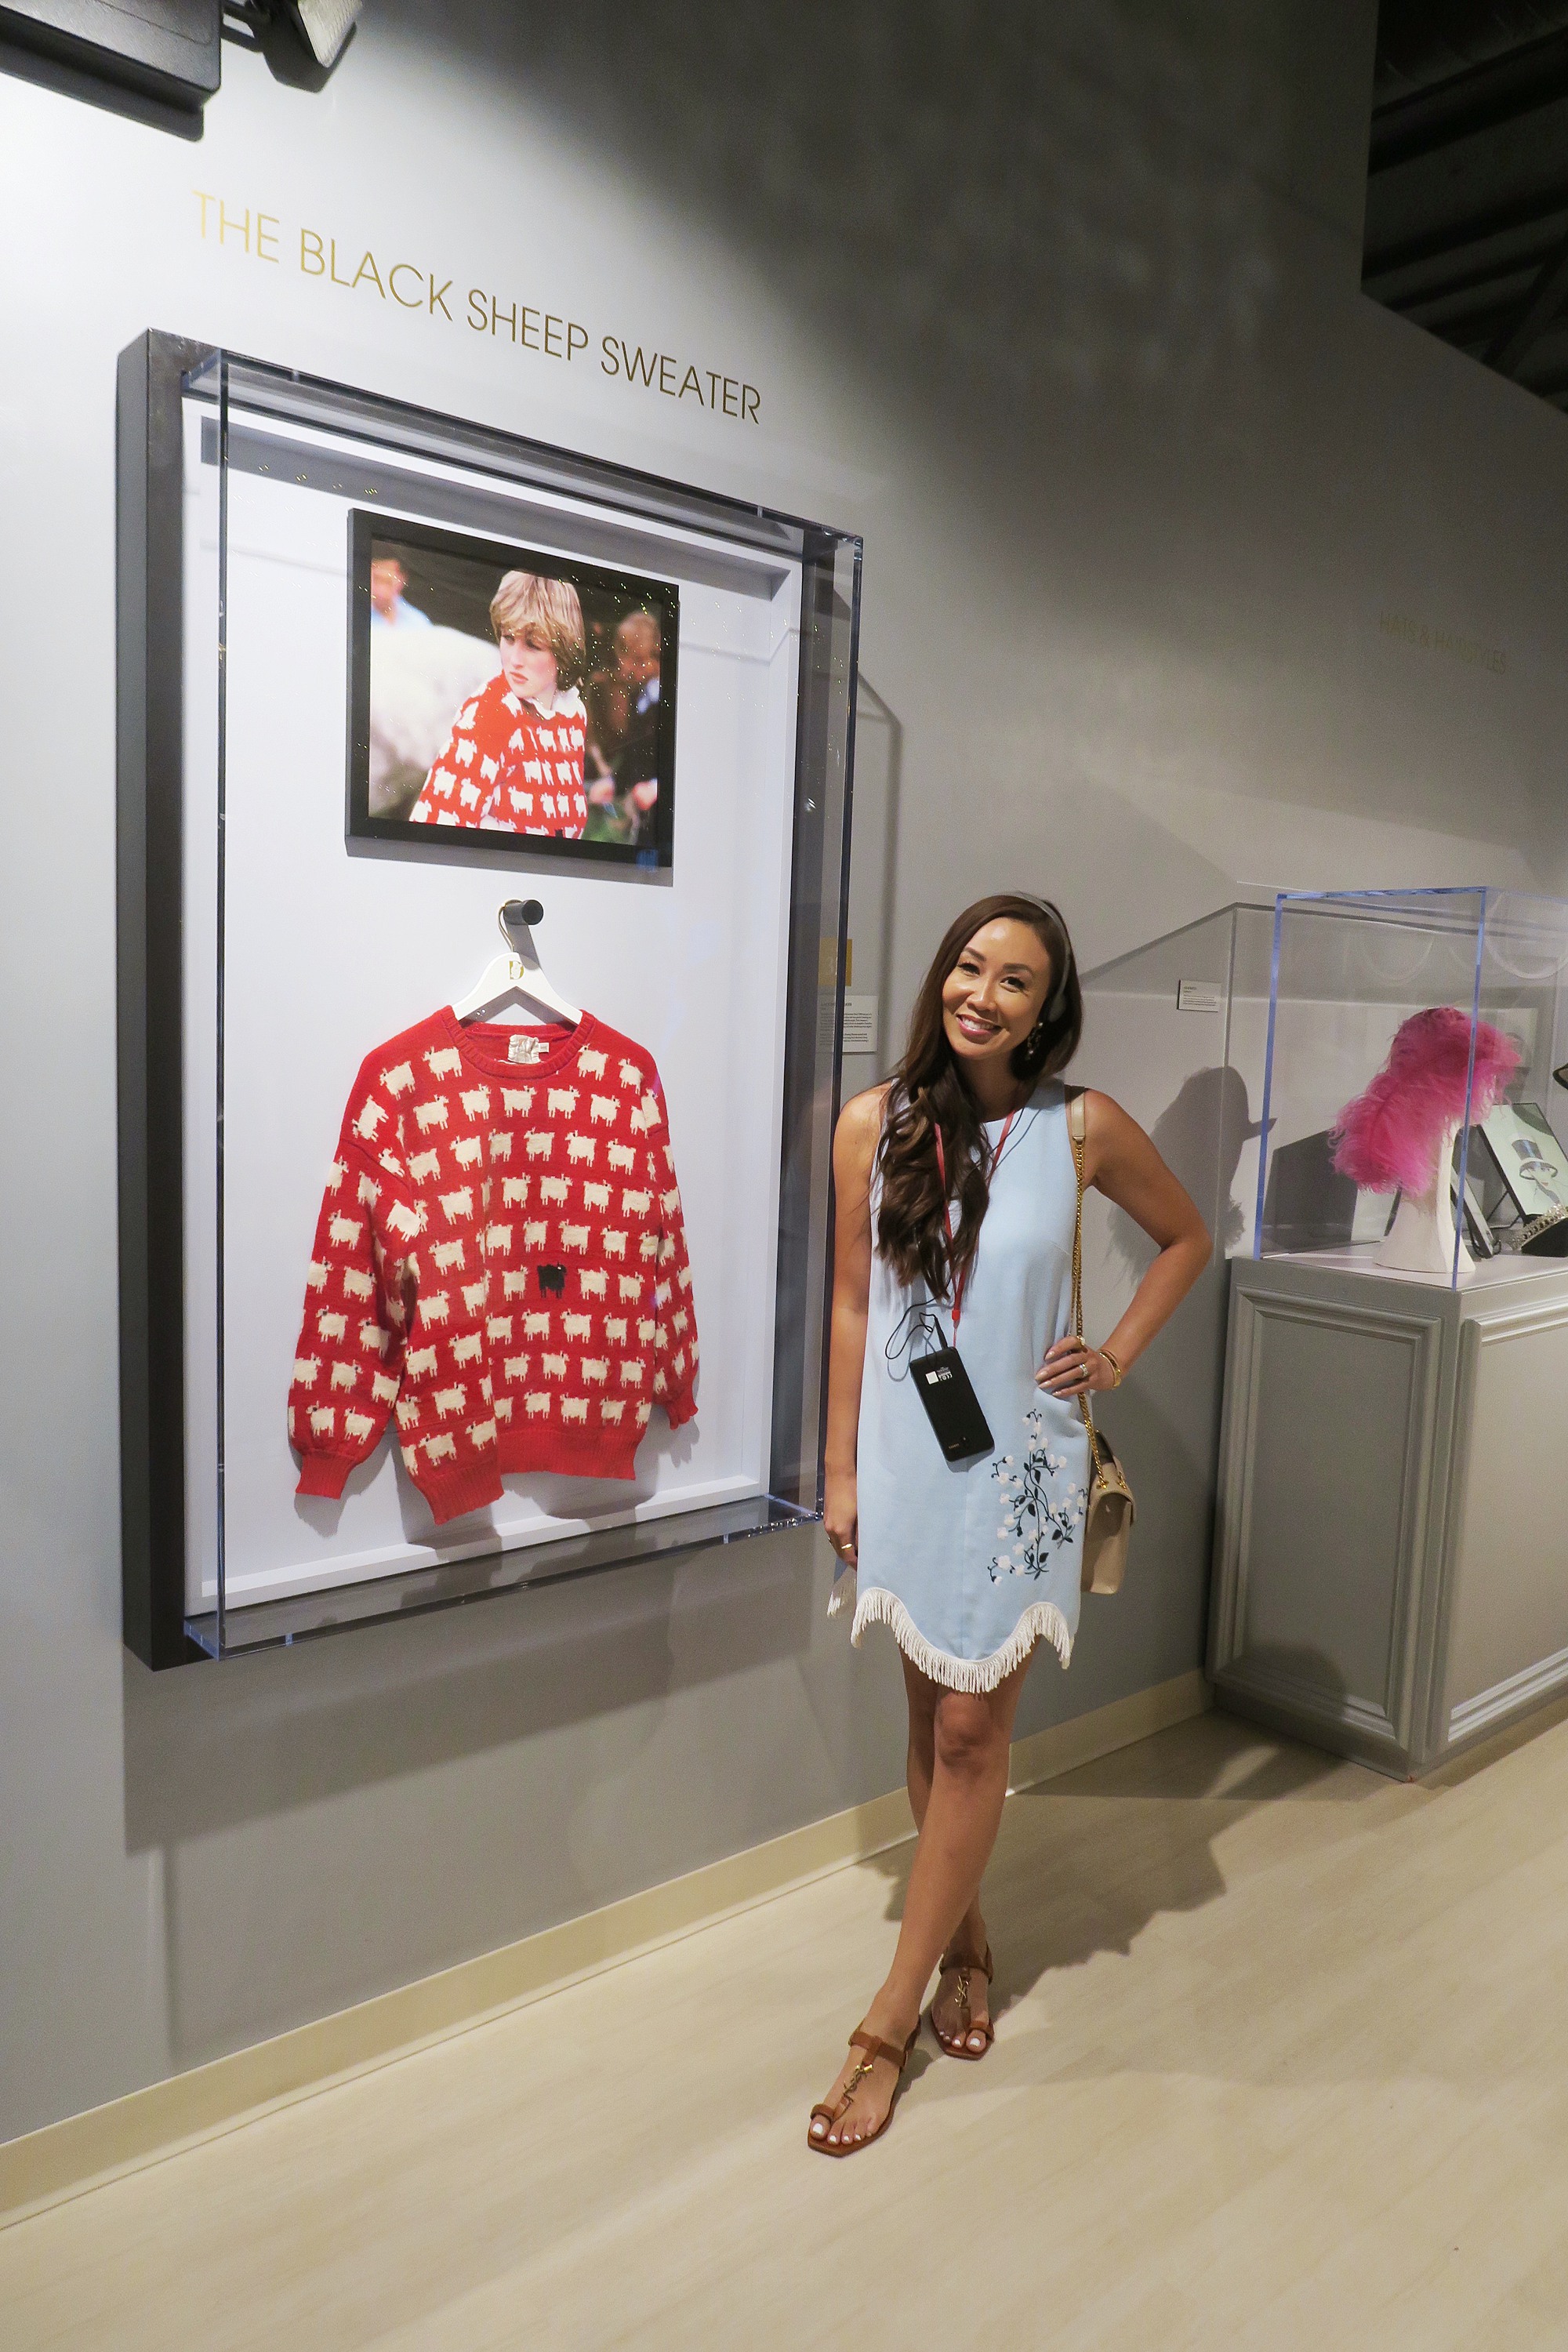 Diana exhibit in Las Vegas a review - Diana standing by the famous red sheep sweater by rowings blazers warm and wonderful